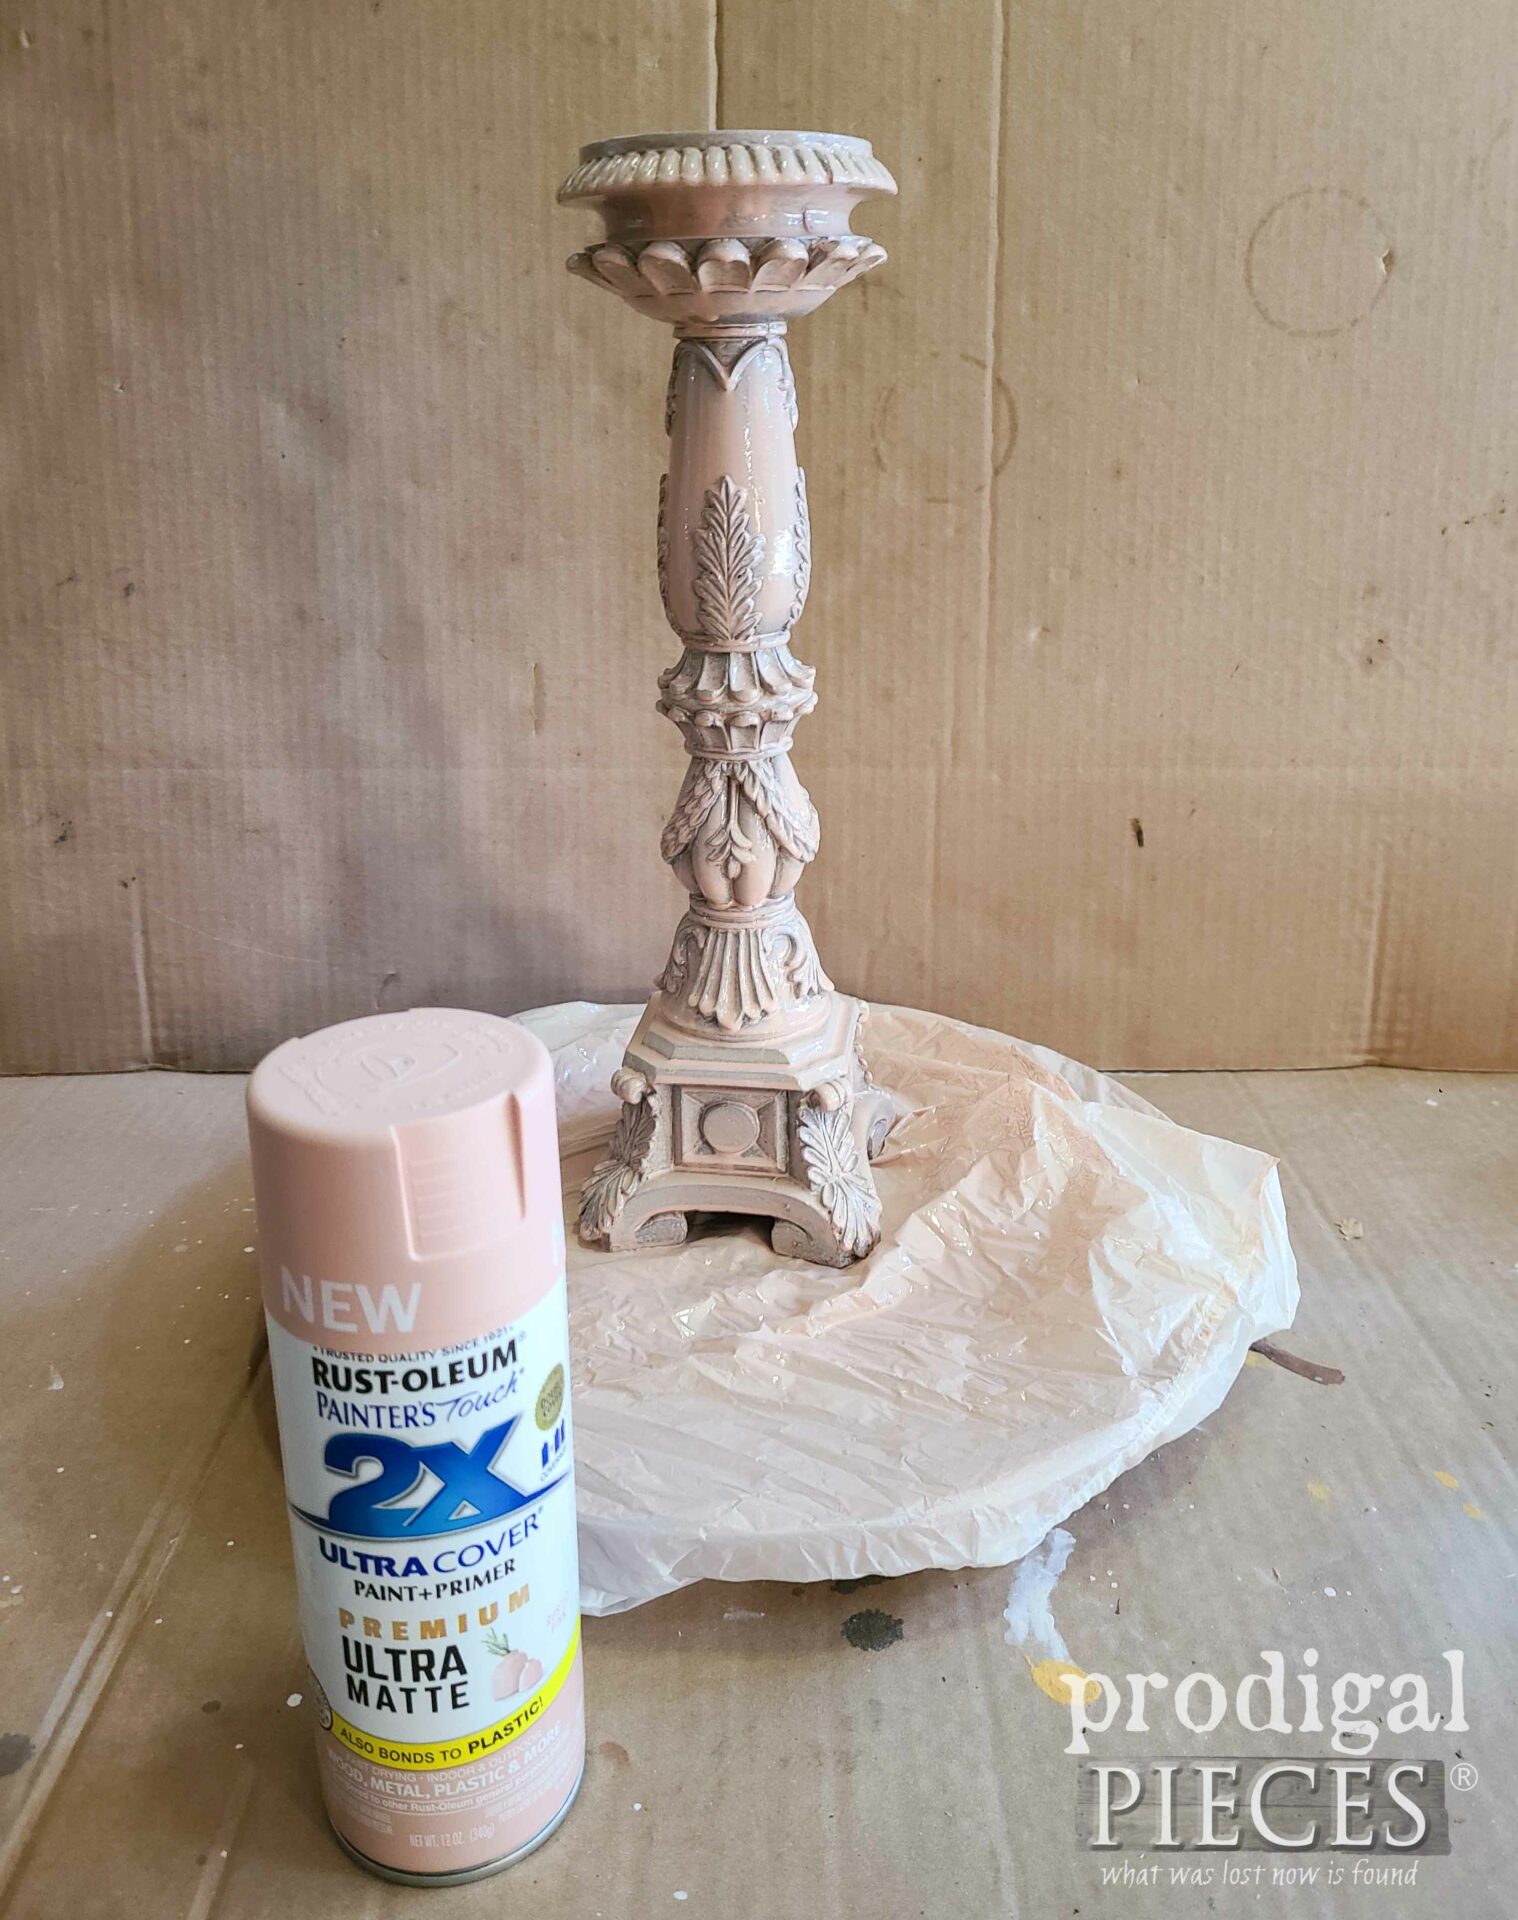 Blush Pink Spray Paint for Thrifted Candleholders | prodigalpieces.com #prodigalpieces